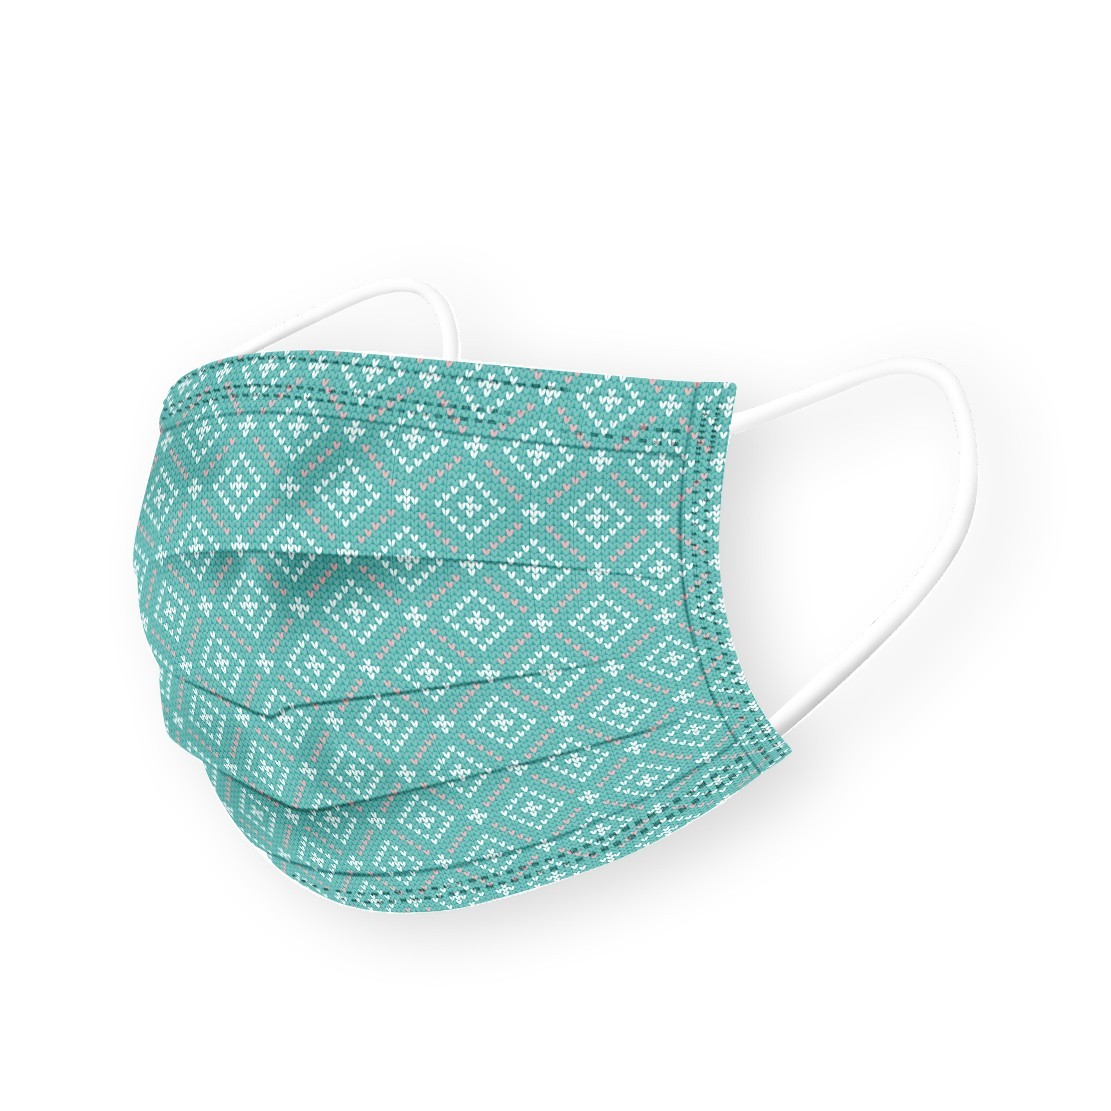  Mask Disposable For Adult Blue Classic Patterned